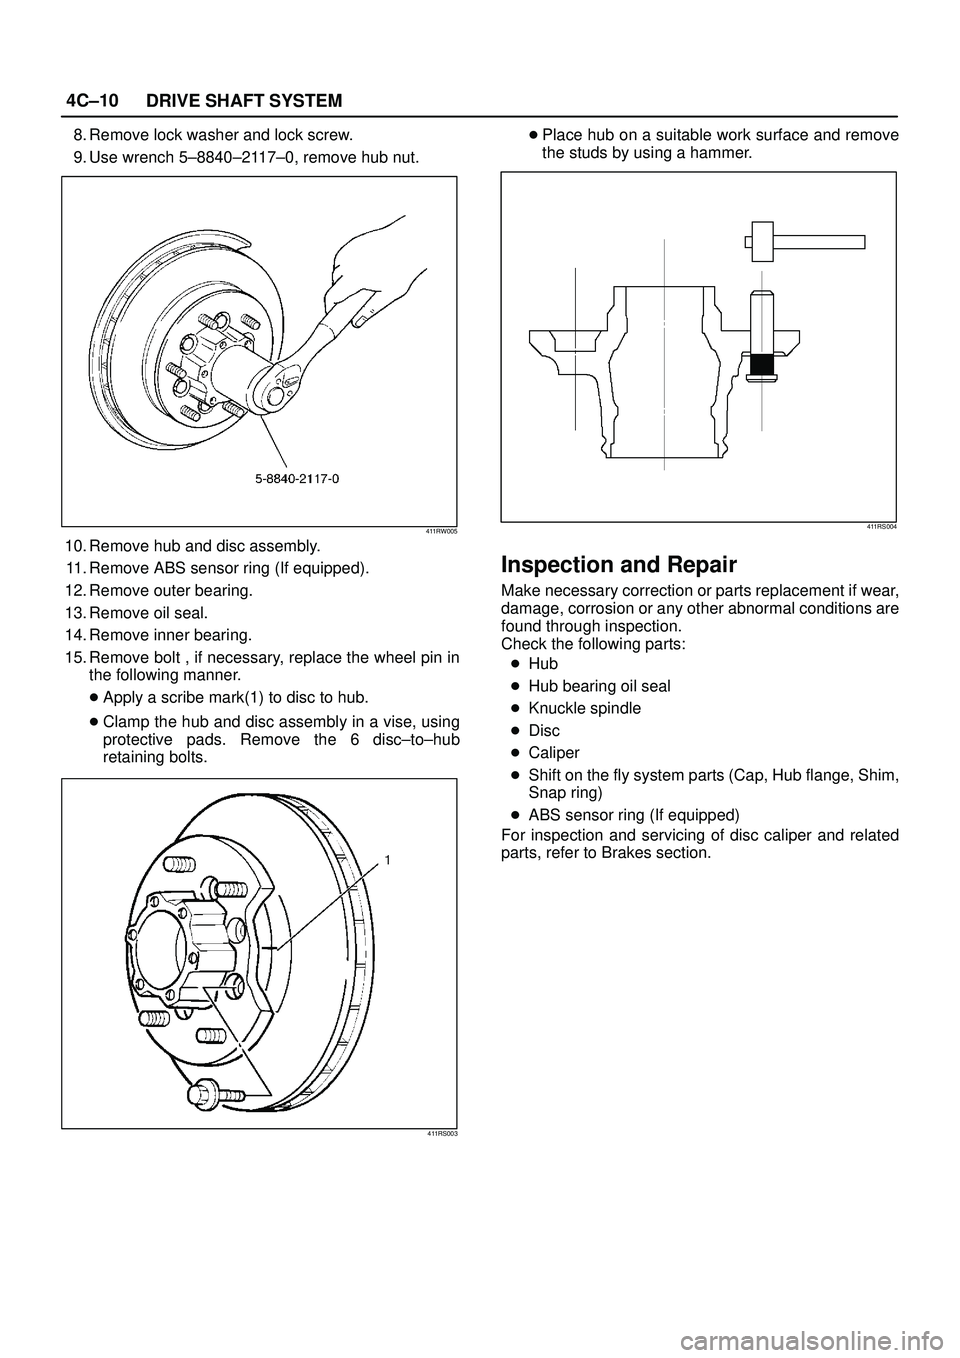 ISUZU TROOPER 1998  Service Repair Manual 4C±10
DRIVE SHAFT SYSTEM
8. Remove lock washer and lock screw.
9. Use wrench 5±8840±2117±0, remove hub nut.
411RW005
10. Remove hub and disc assembly.
11. Remove ABS sensor ring (If equipped).
12.